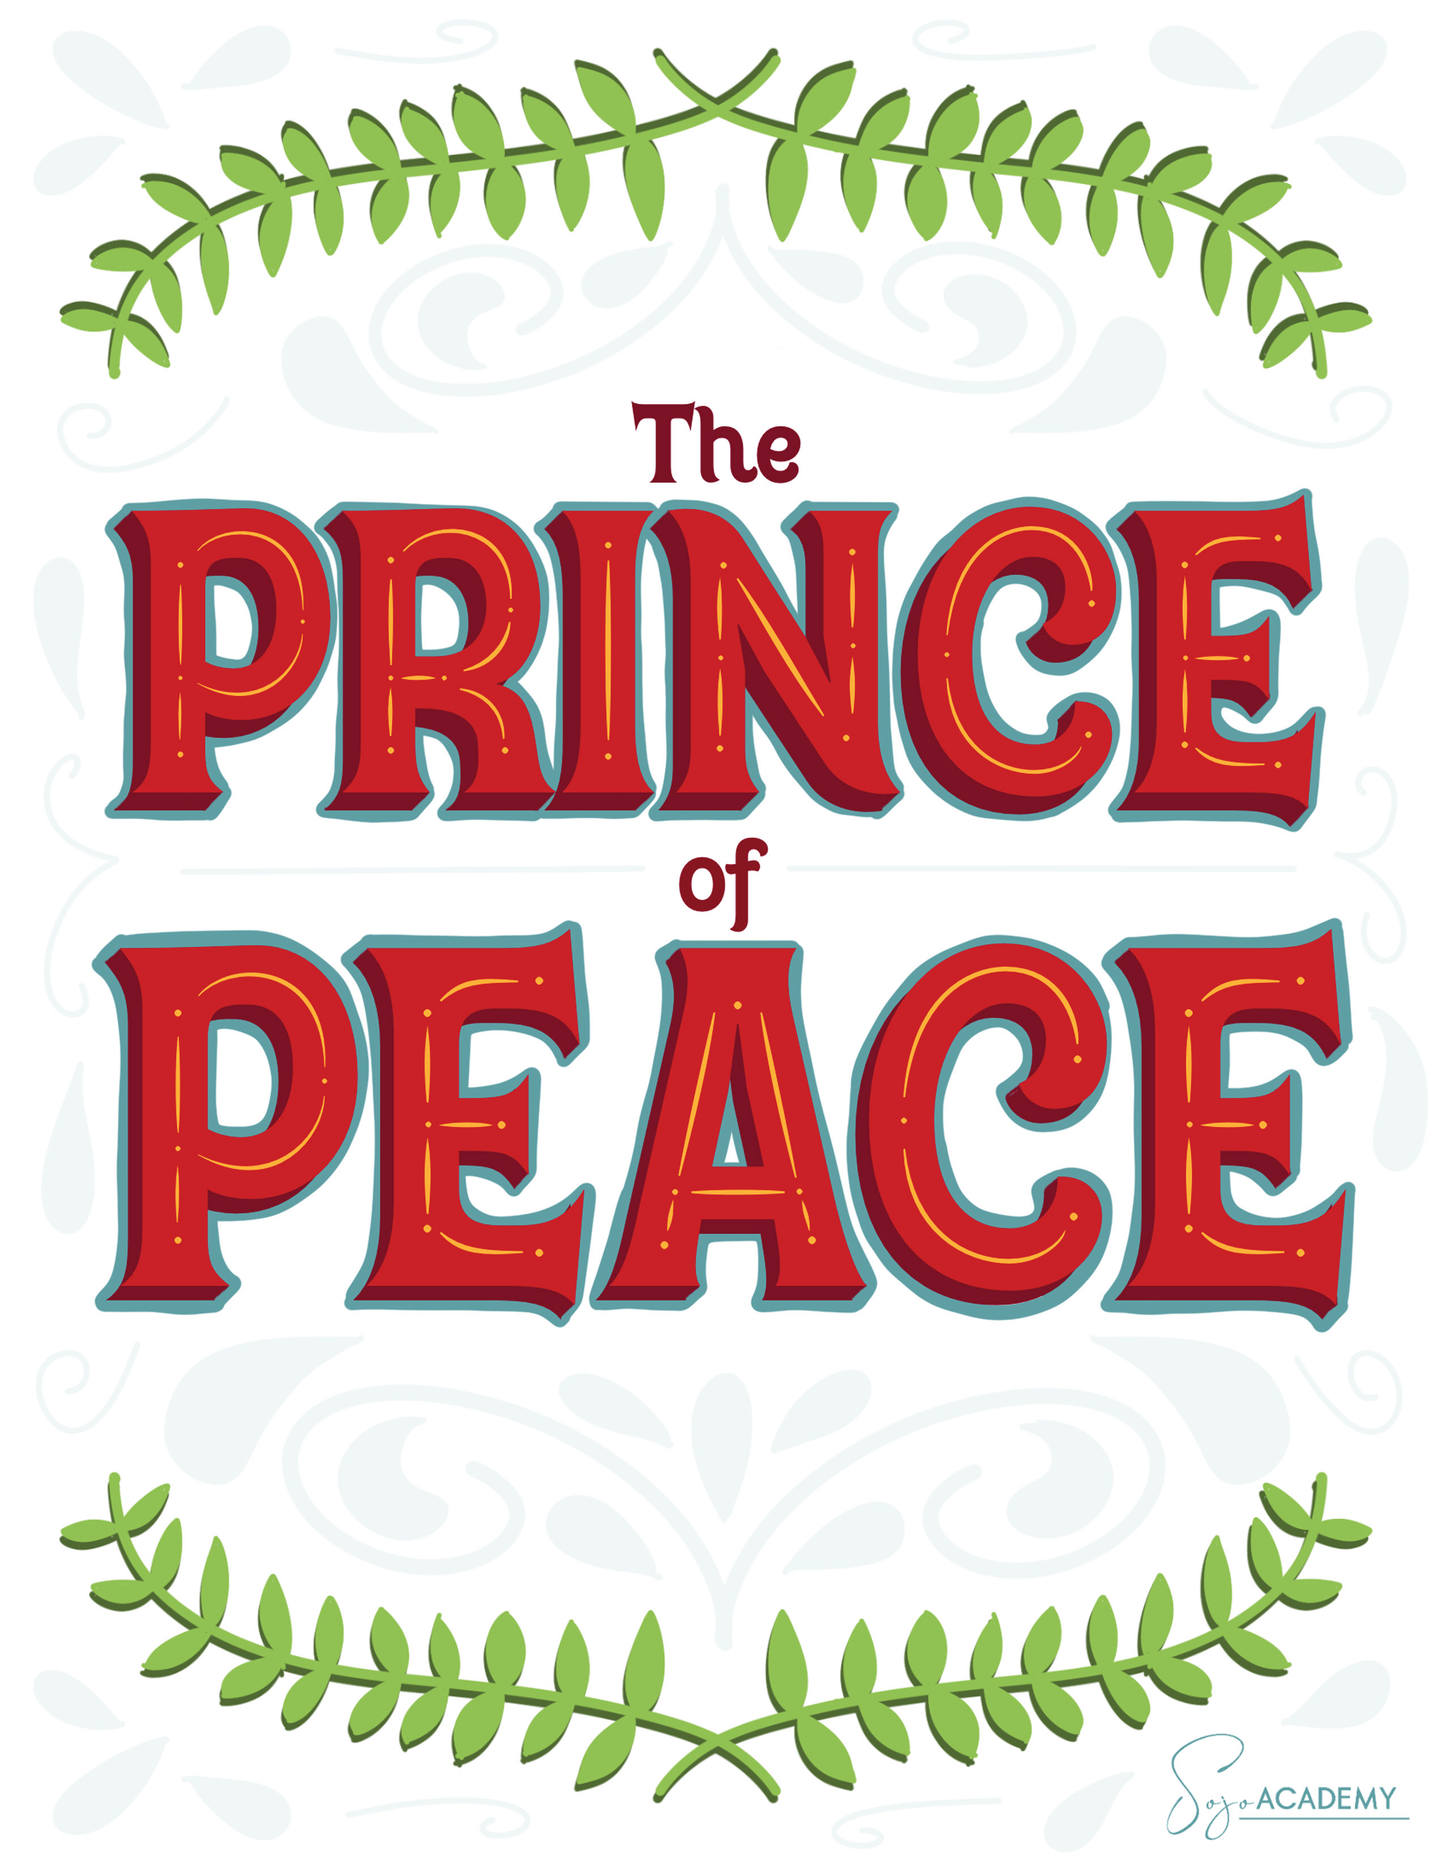 The Prince of Peace (4-Week Bible Study)